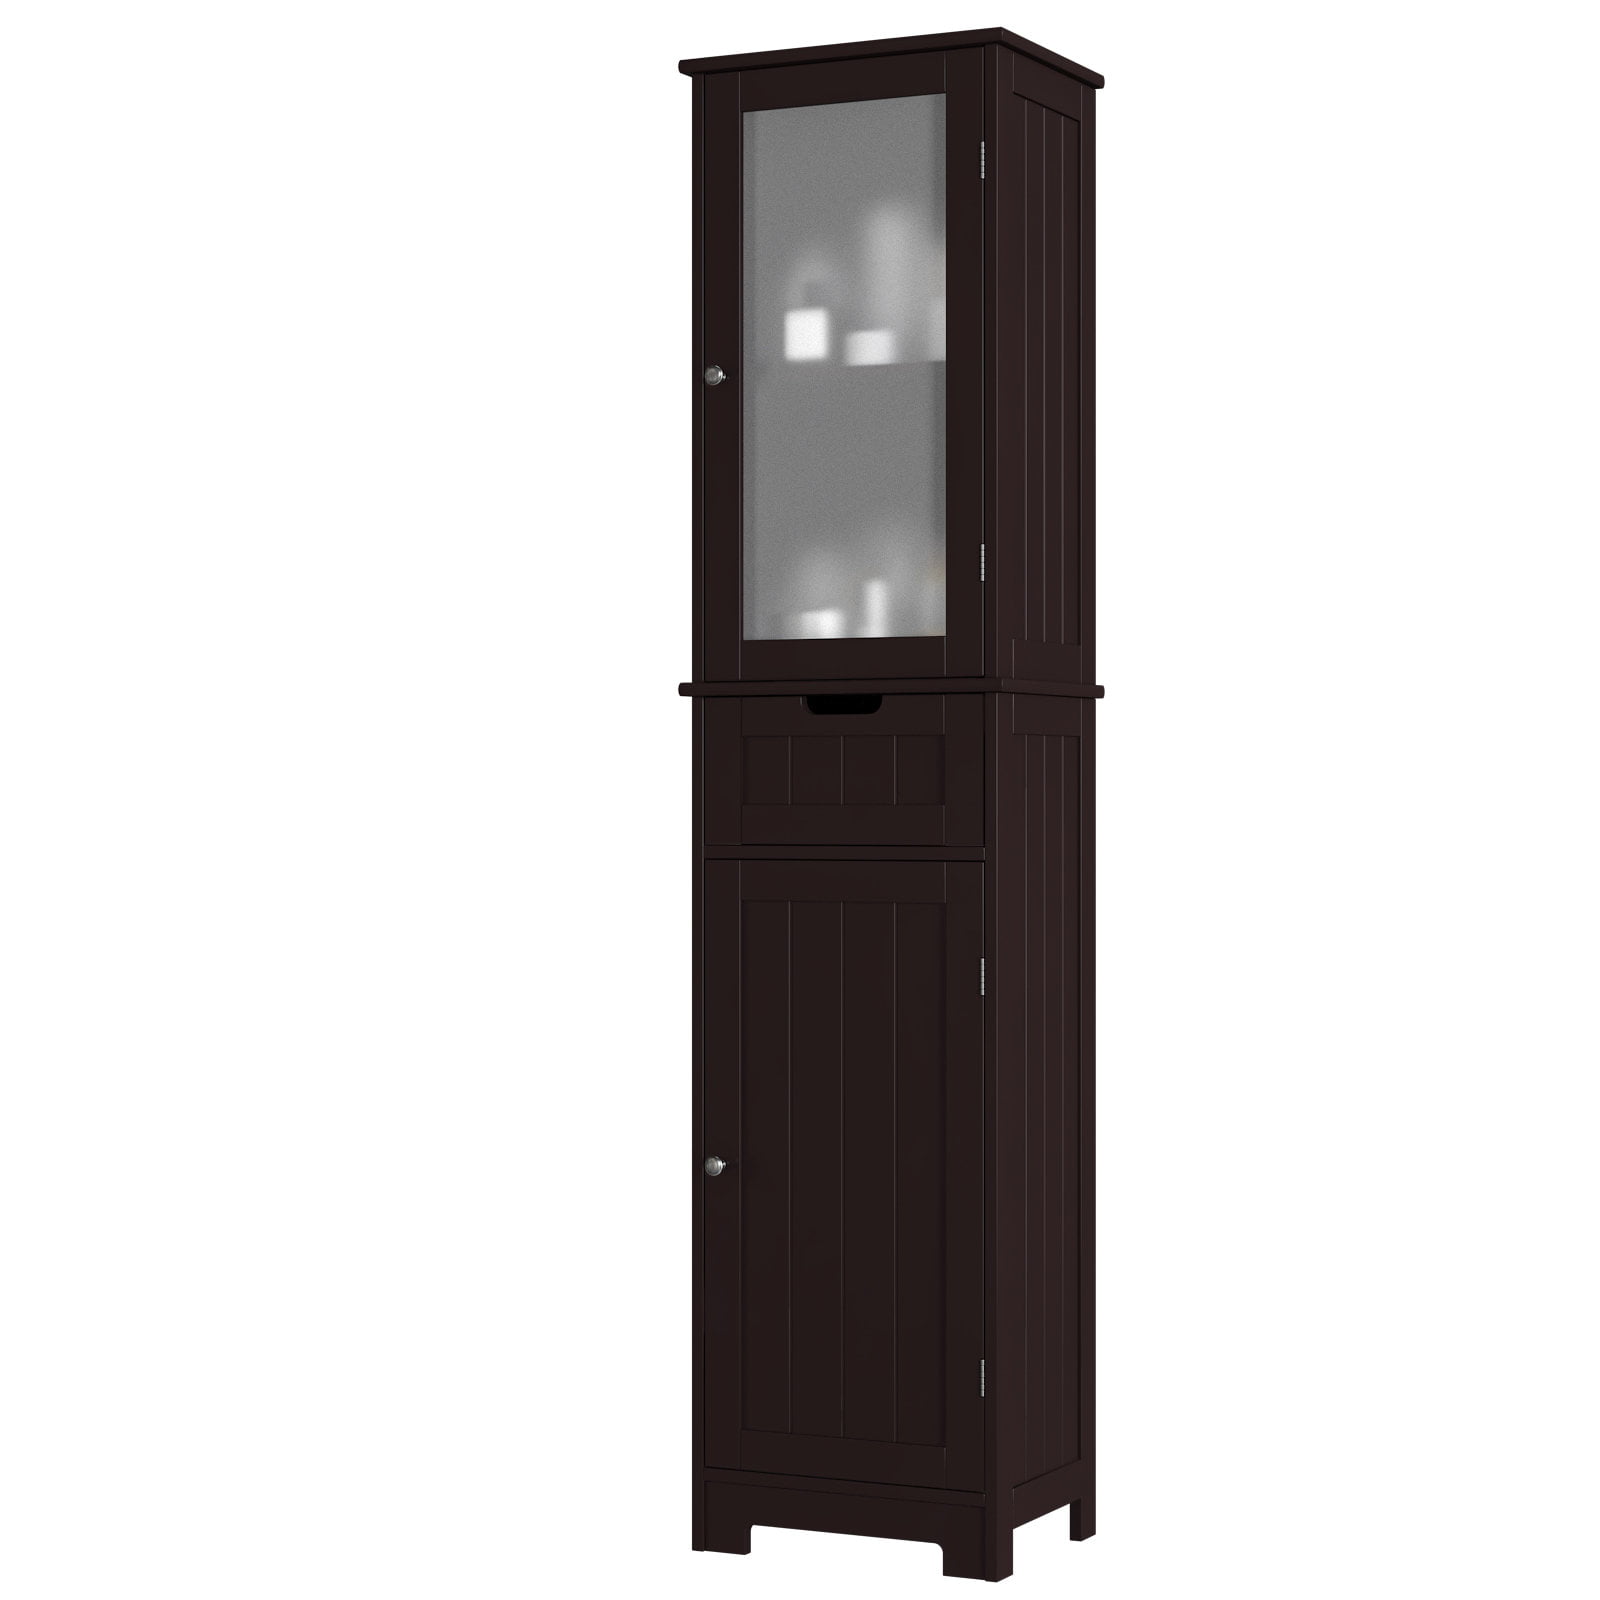 Tall Freestanding Bathroom Storage Cabinet With Drawers And